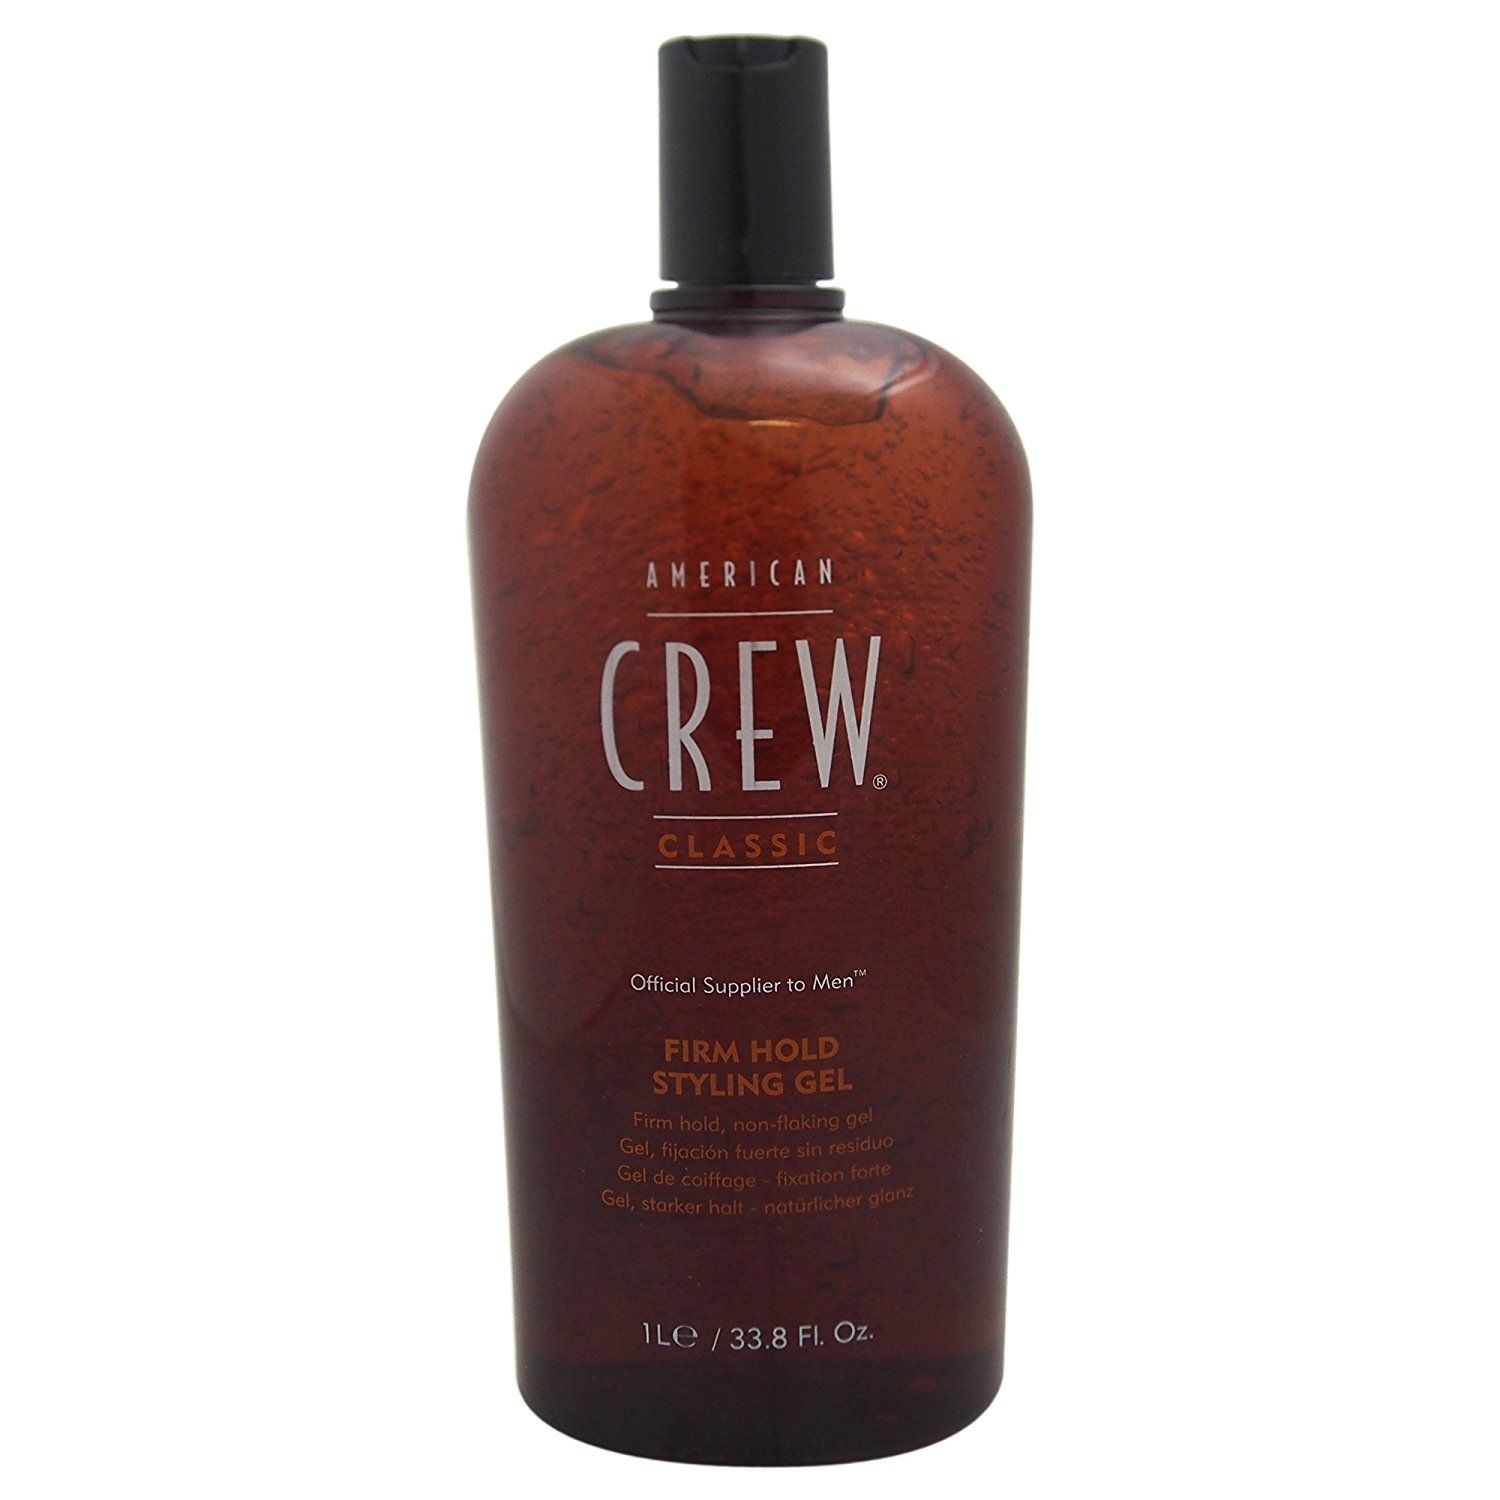 American Crew Classic Firm Hold Styling Gel, 33.8 Fl. Oz., for men